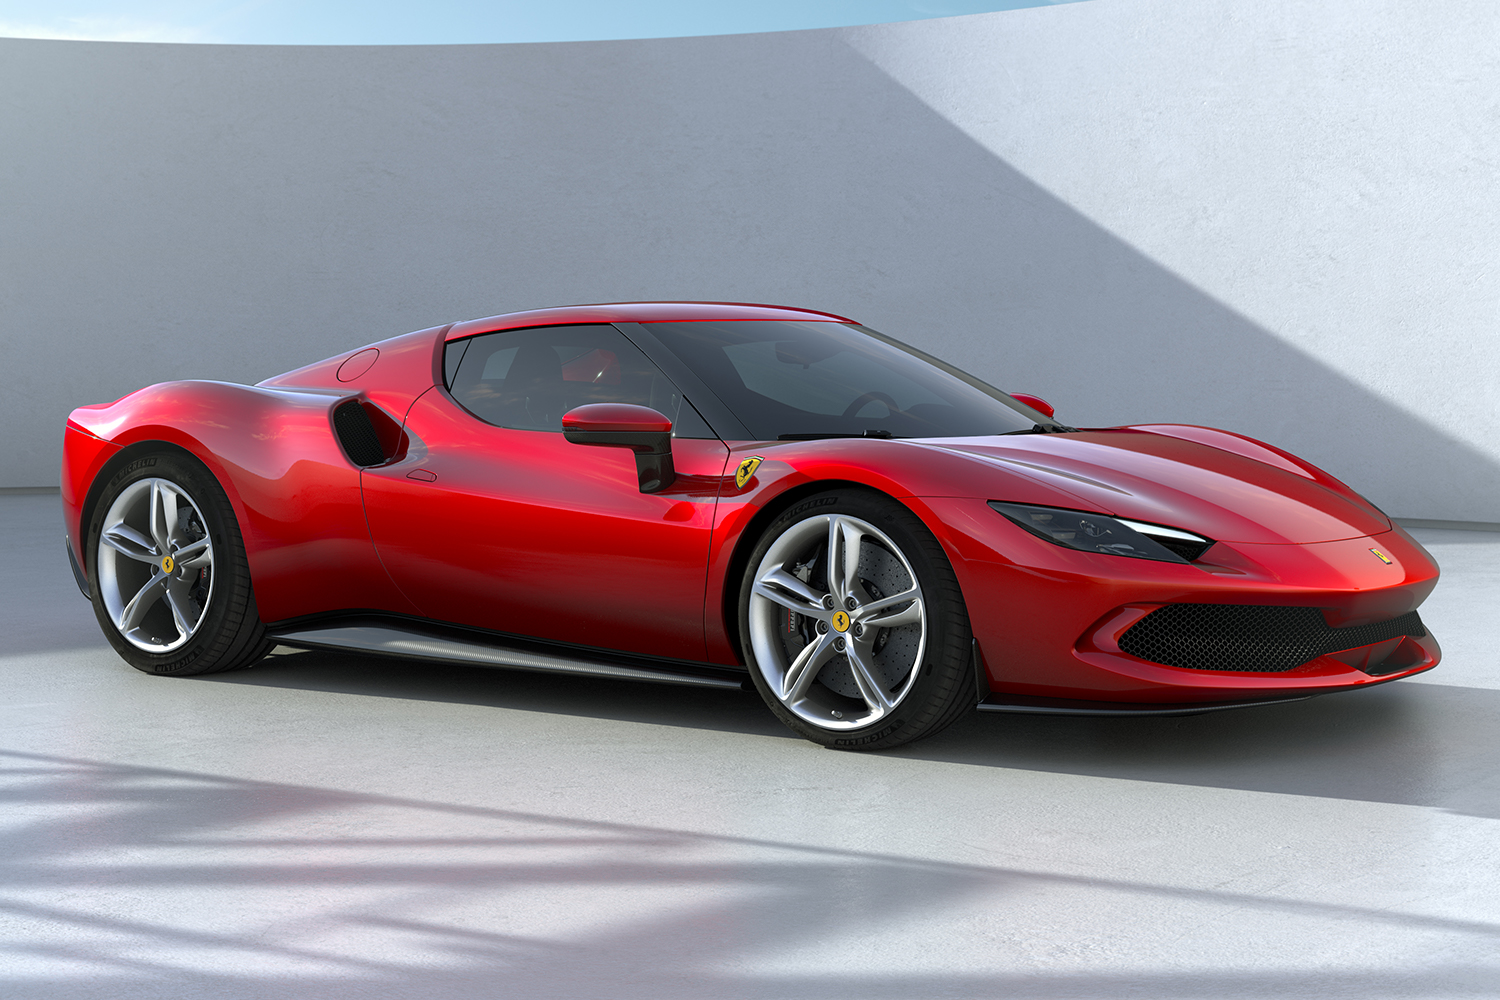 The right side of the new Ferrari 296 GTB in red, a plug-in hybrid car with a brand-new V6 engine